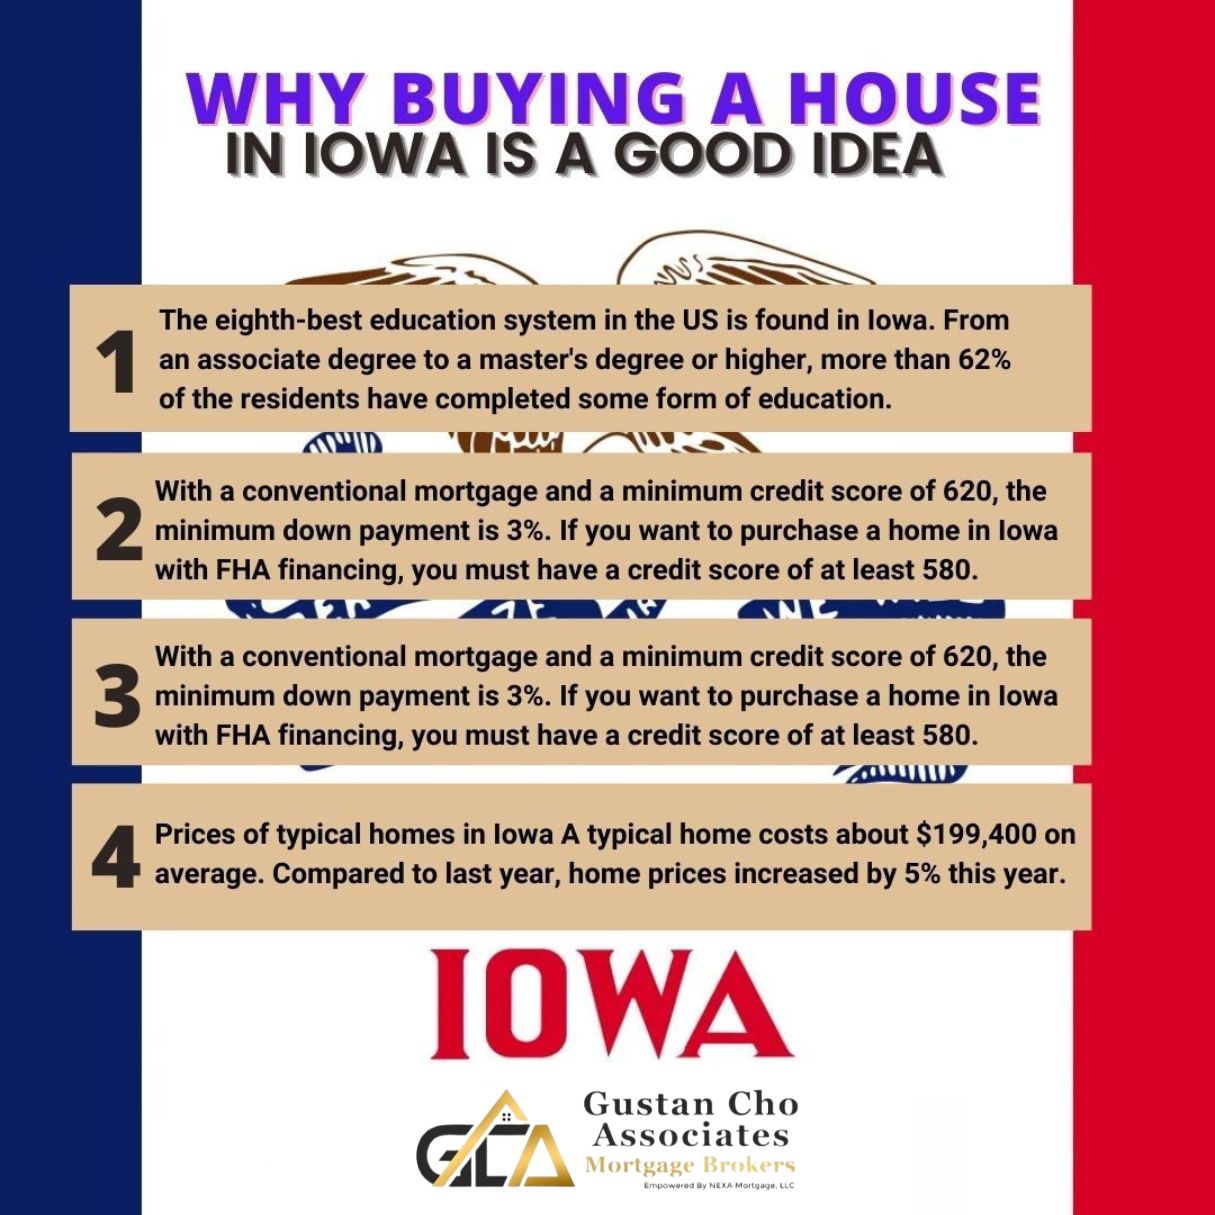 Why Buying a House In Iowa Is a Good Idea